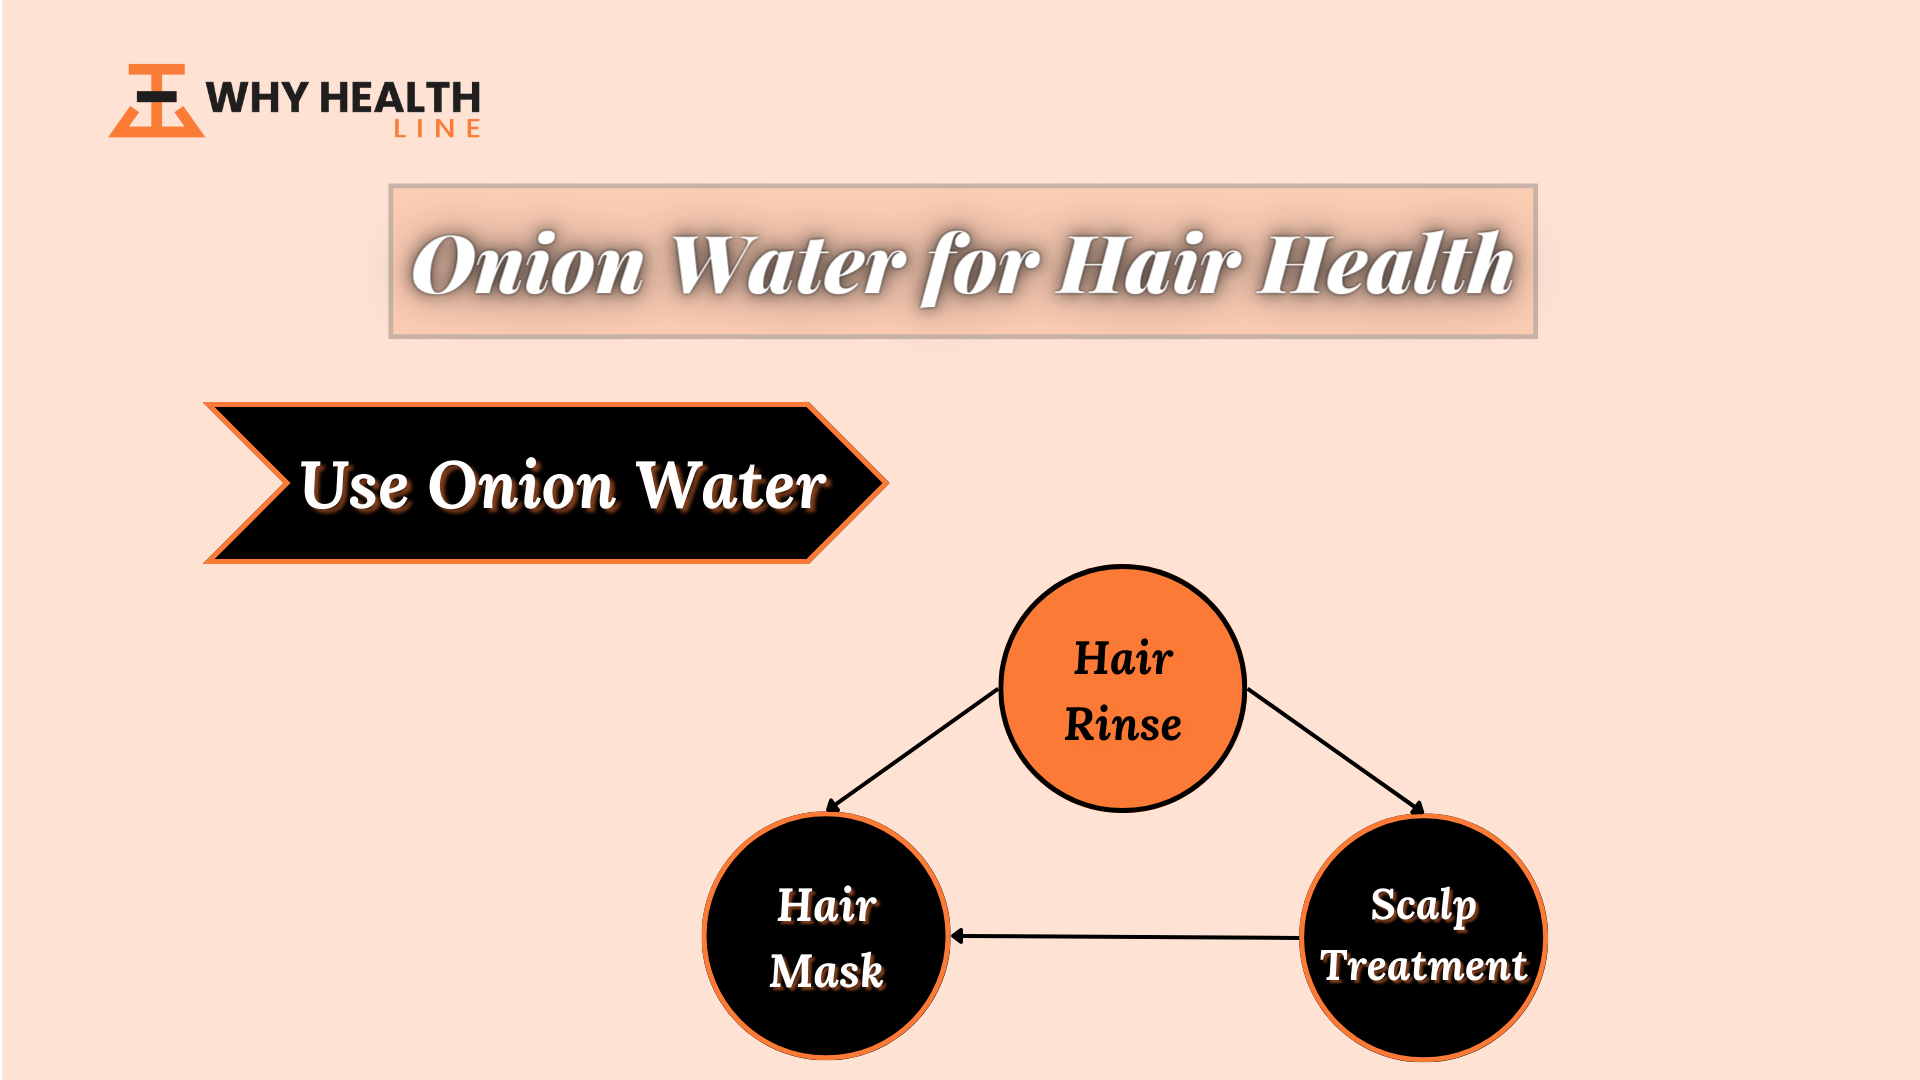 use of onion water for hair